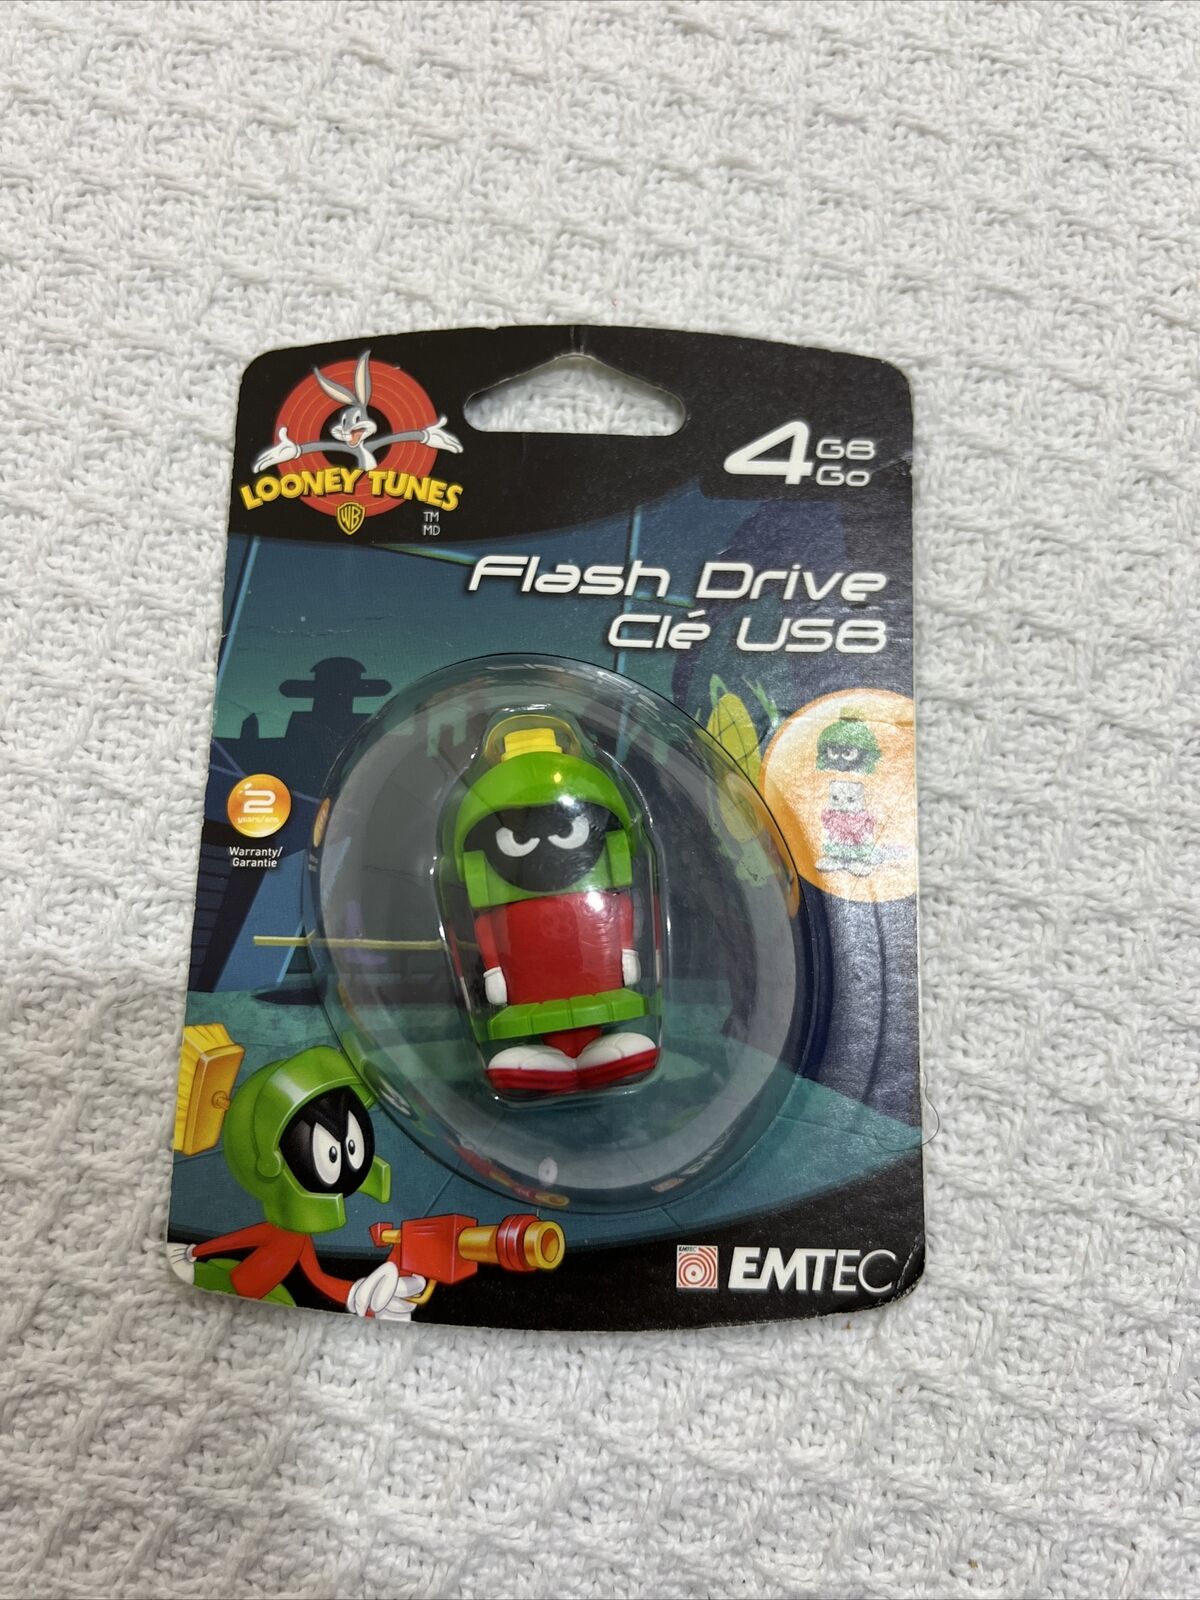 Emtec Looney Tunes MARVIN THE MARTIAN 4GB Flash Drive USB Sealed Package